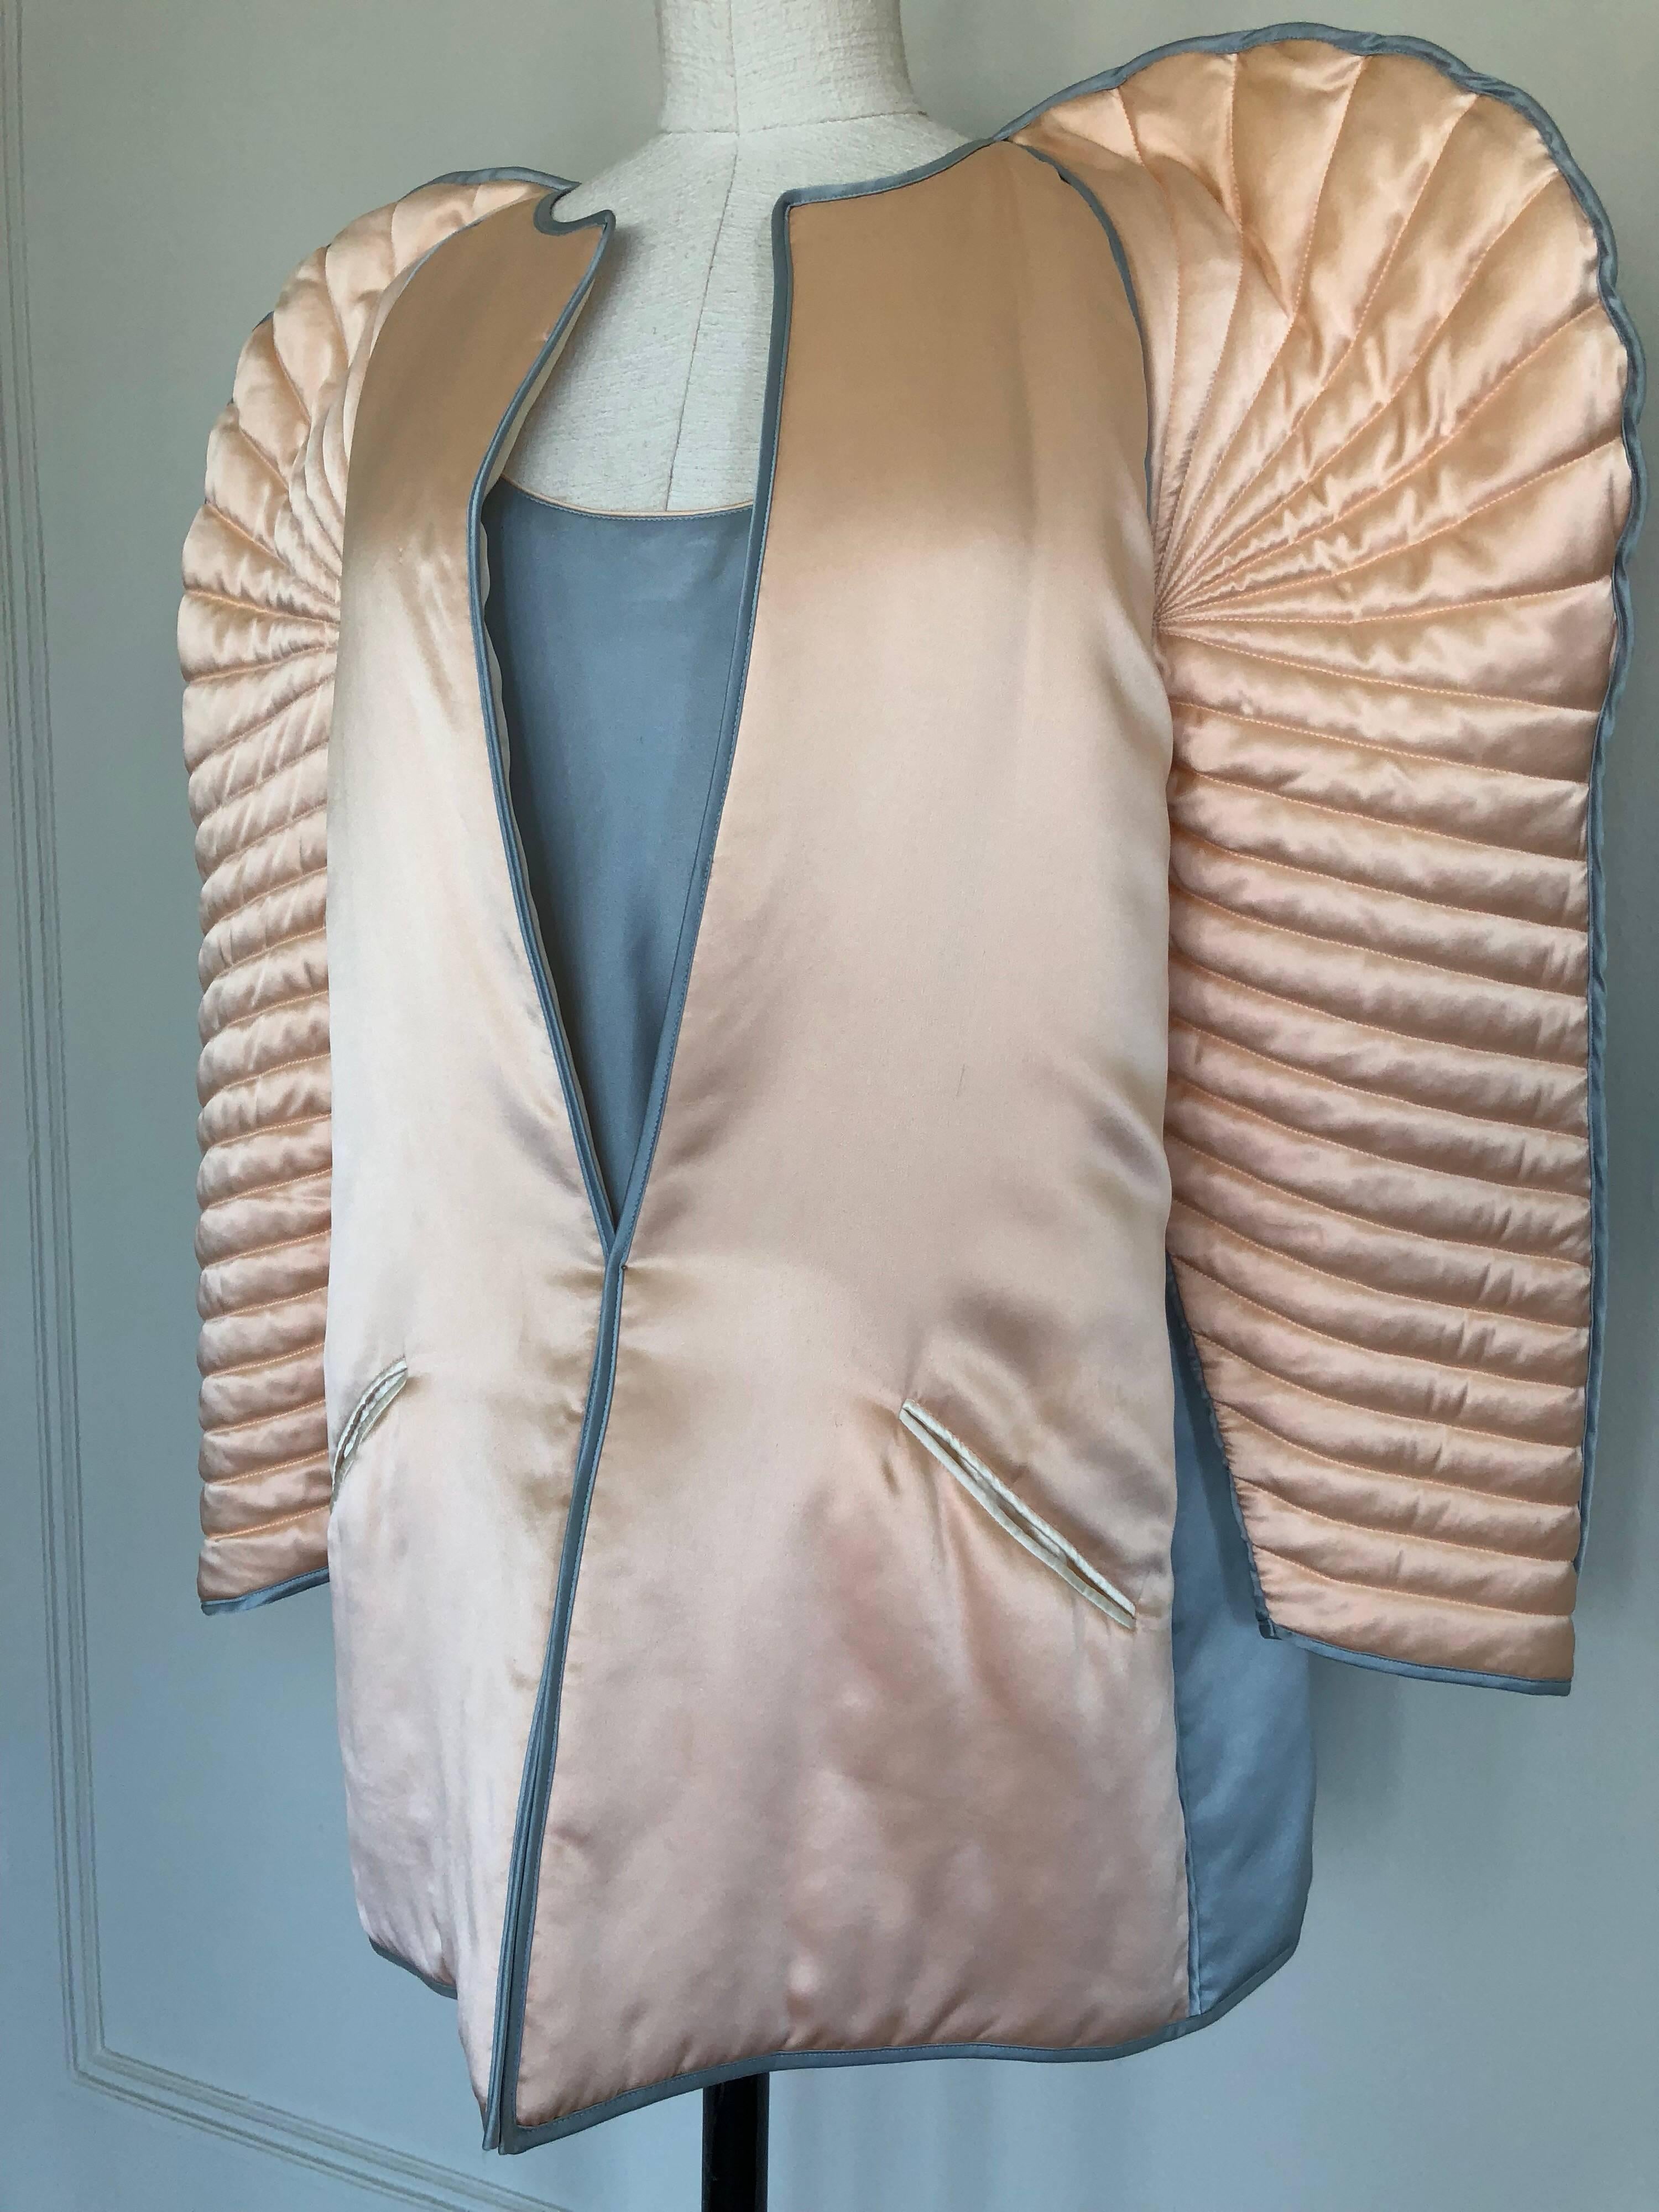 This dramatic Fernando Sanchez quilted bed jacket ensemble was featured in American Vogue c.1983 and was shot by Helmet Newton. Fernando Sanchez was known for his provocative lingerie collections, which, though designed for elegant boudoirs, were